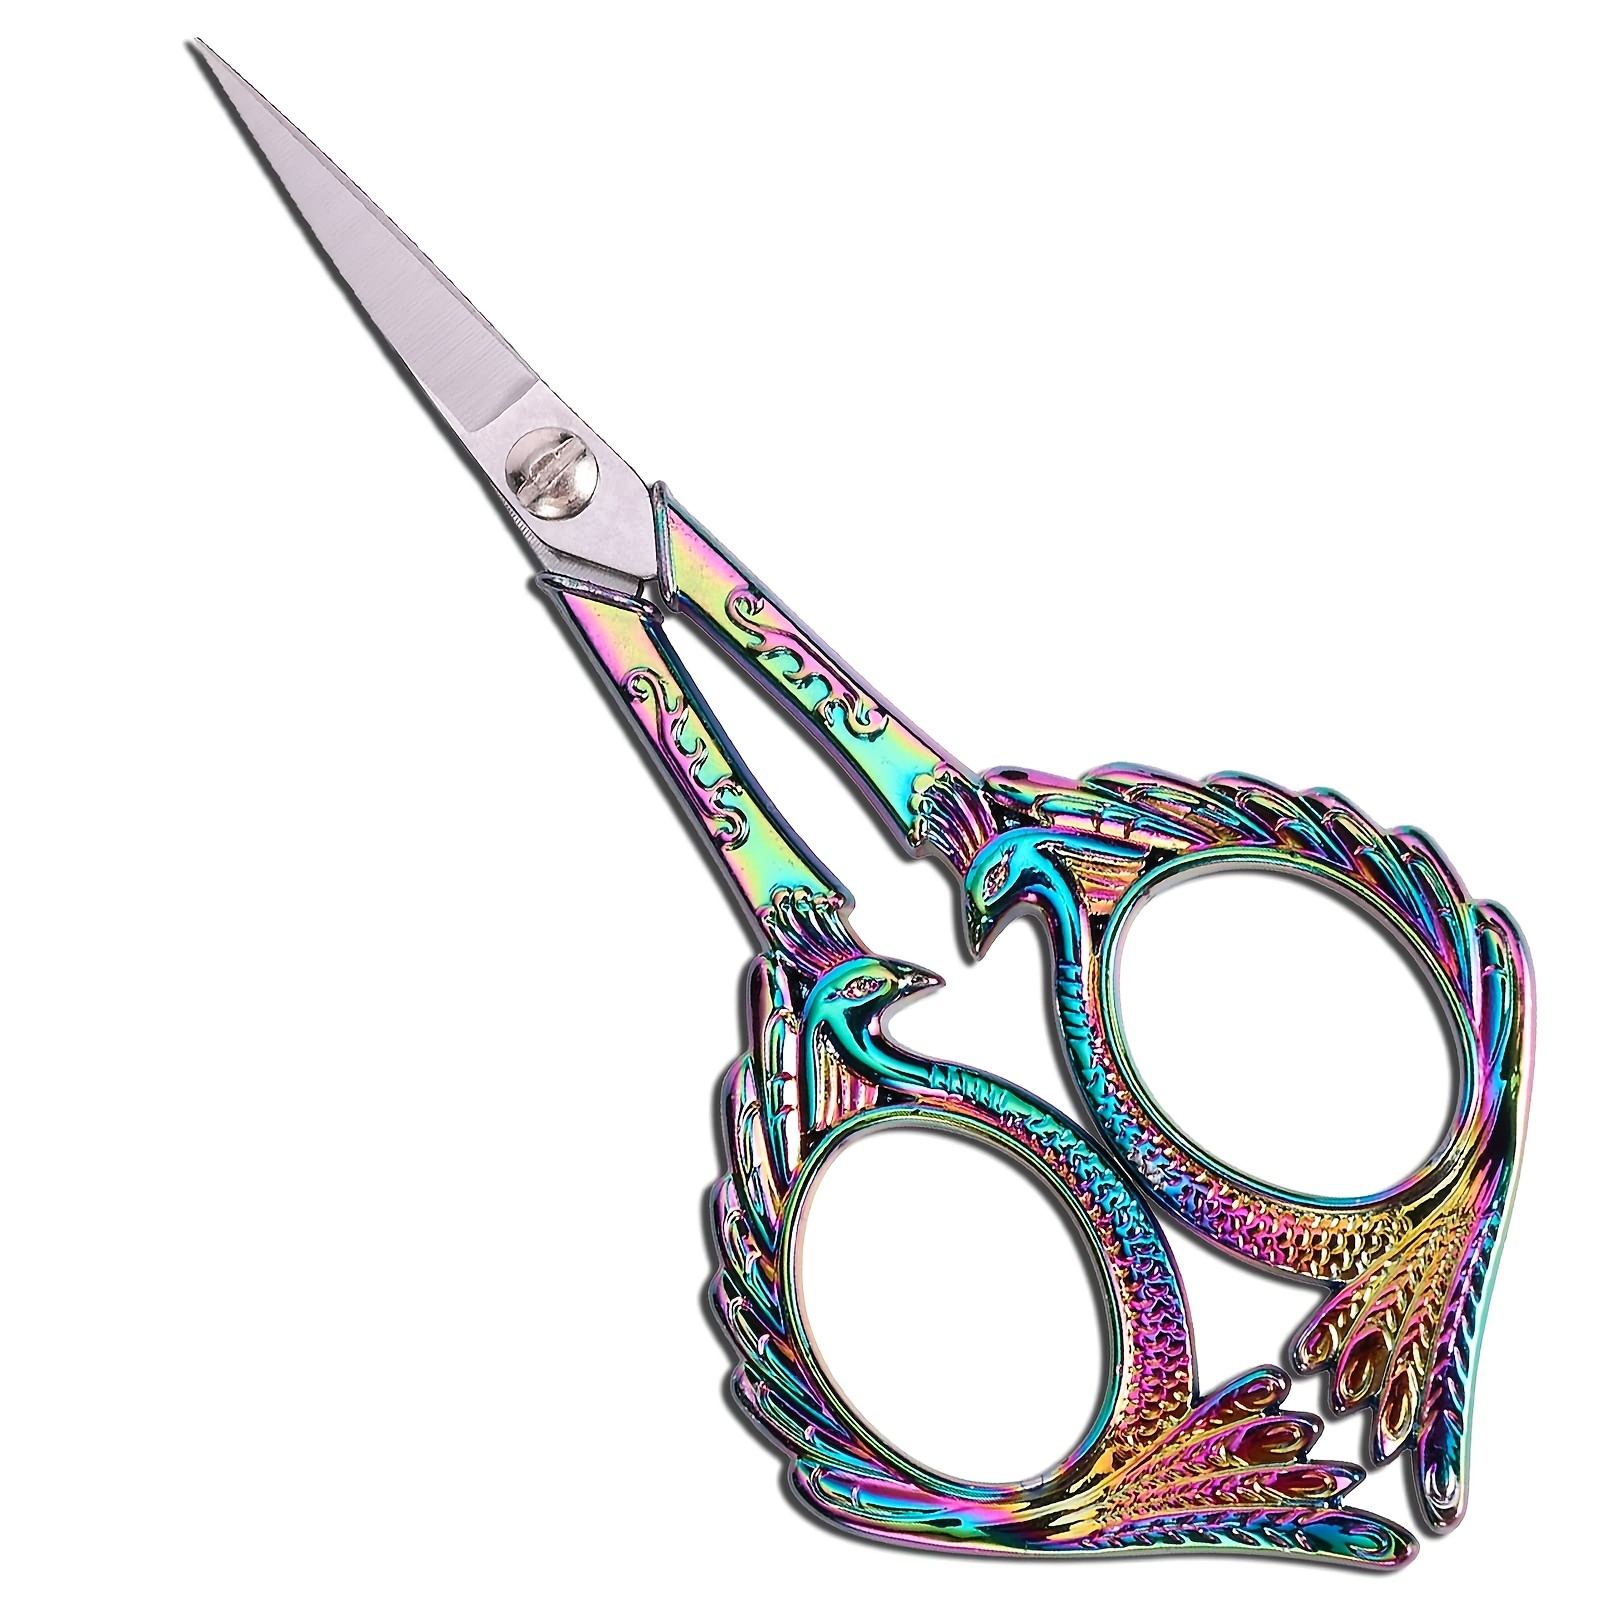 Ymiko Cute Scissors,Embroidery Scissors Professional Reliable Retro Style  Compact Portable Sewing Supplies For Scrapbooking,Embroidery Scissors